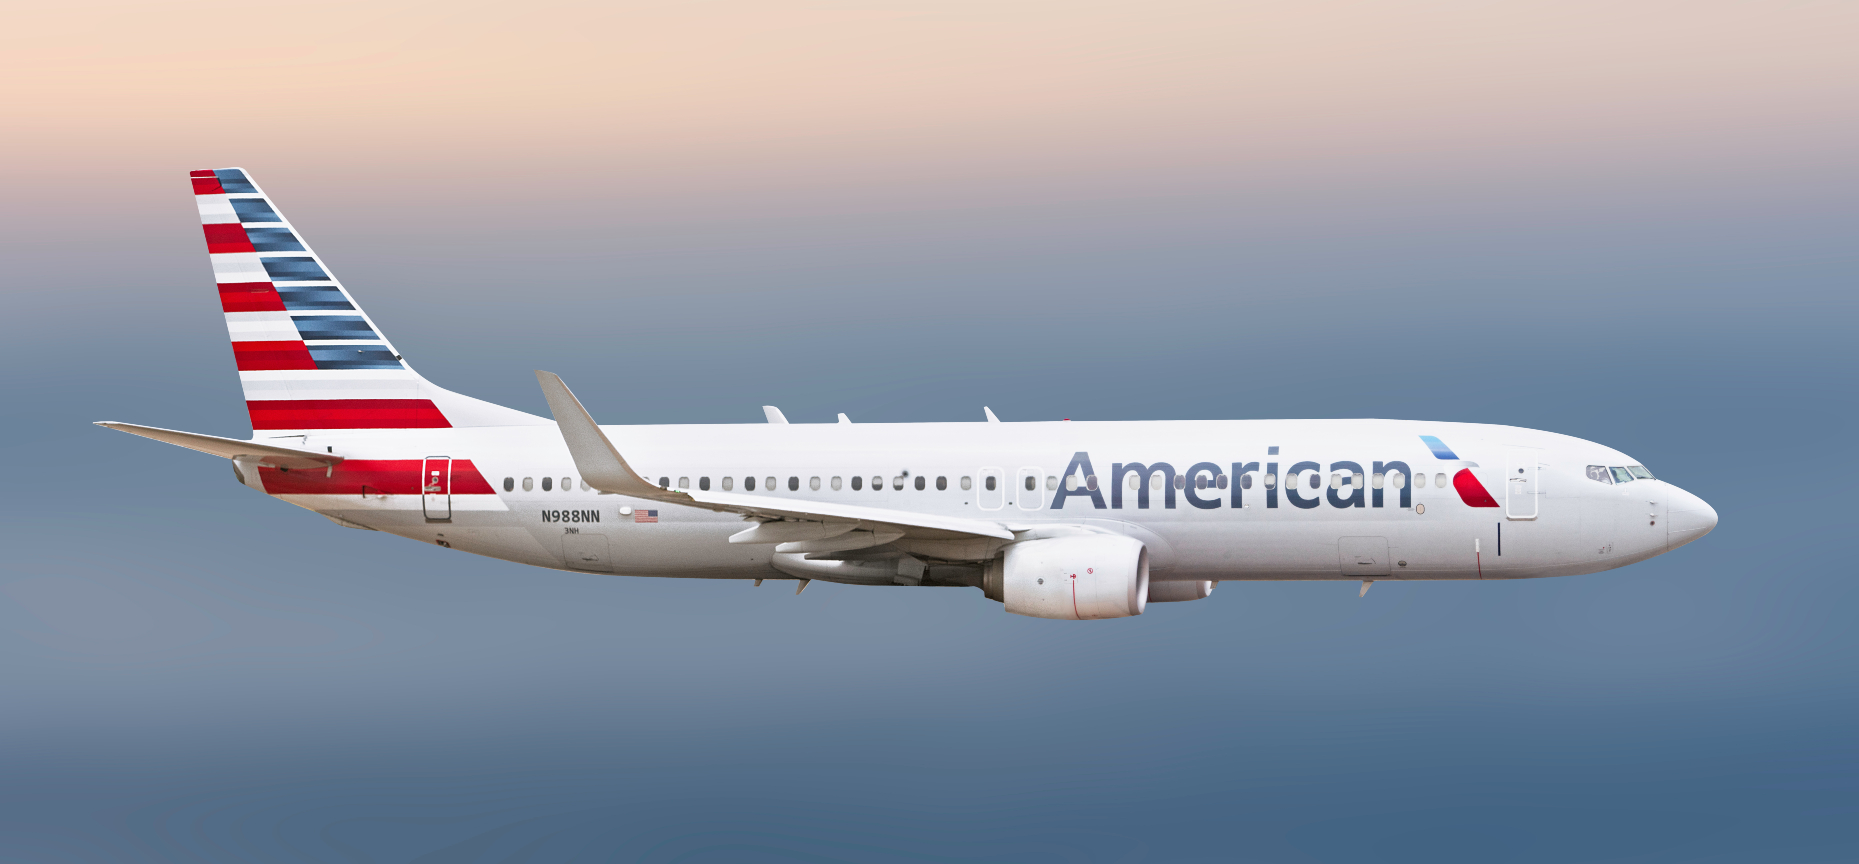 student discount on American Airlines